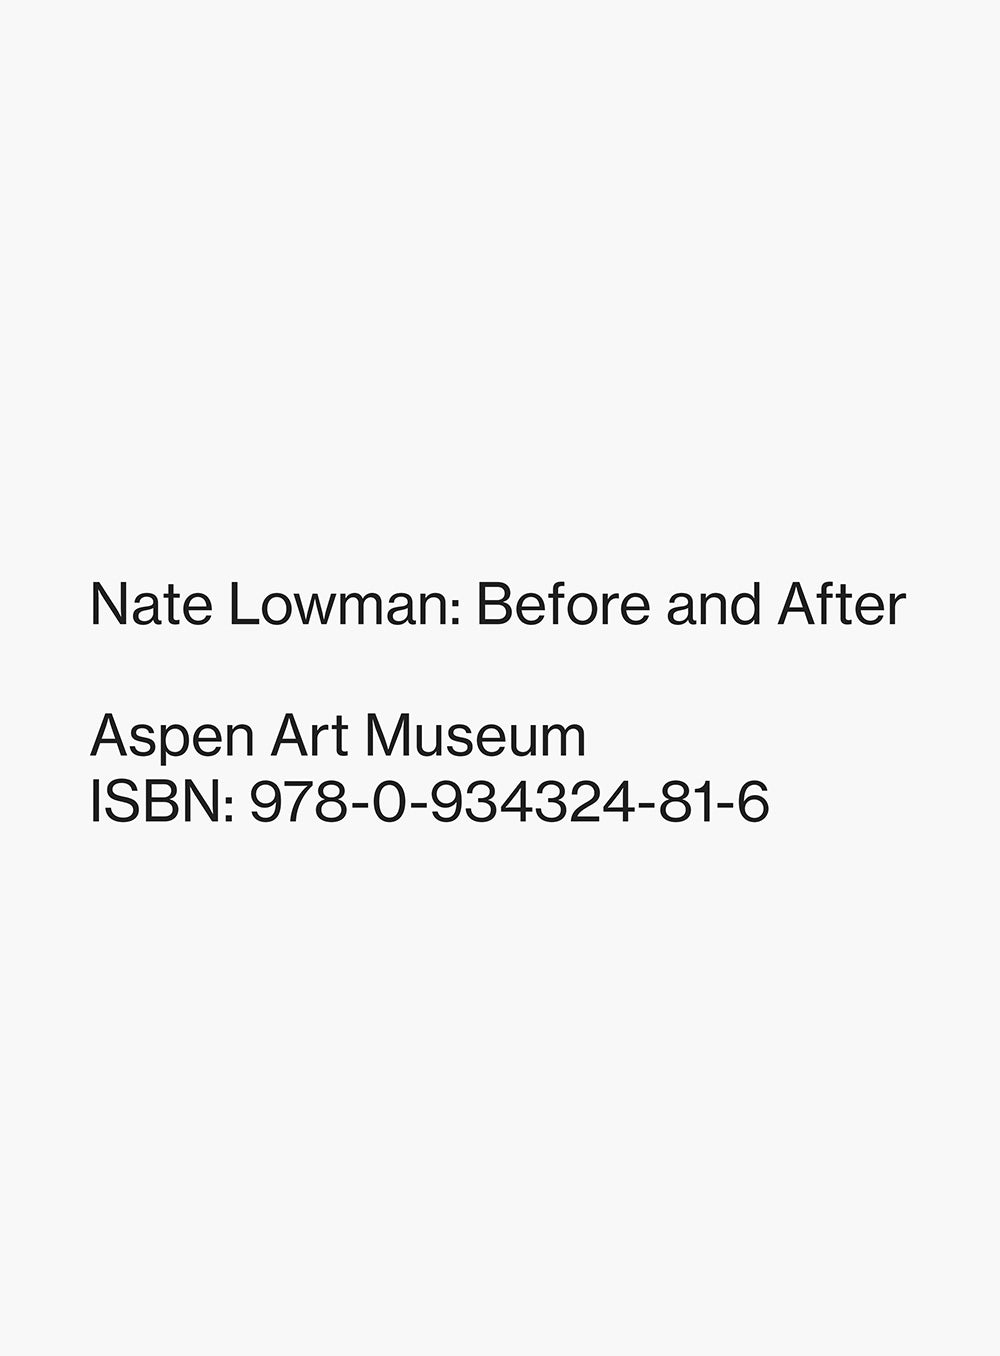 Nate Lowman: Before and After